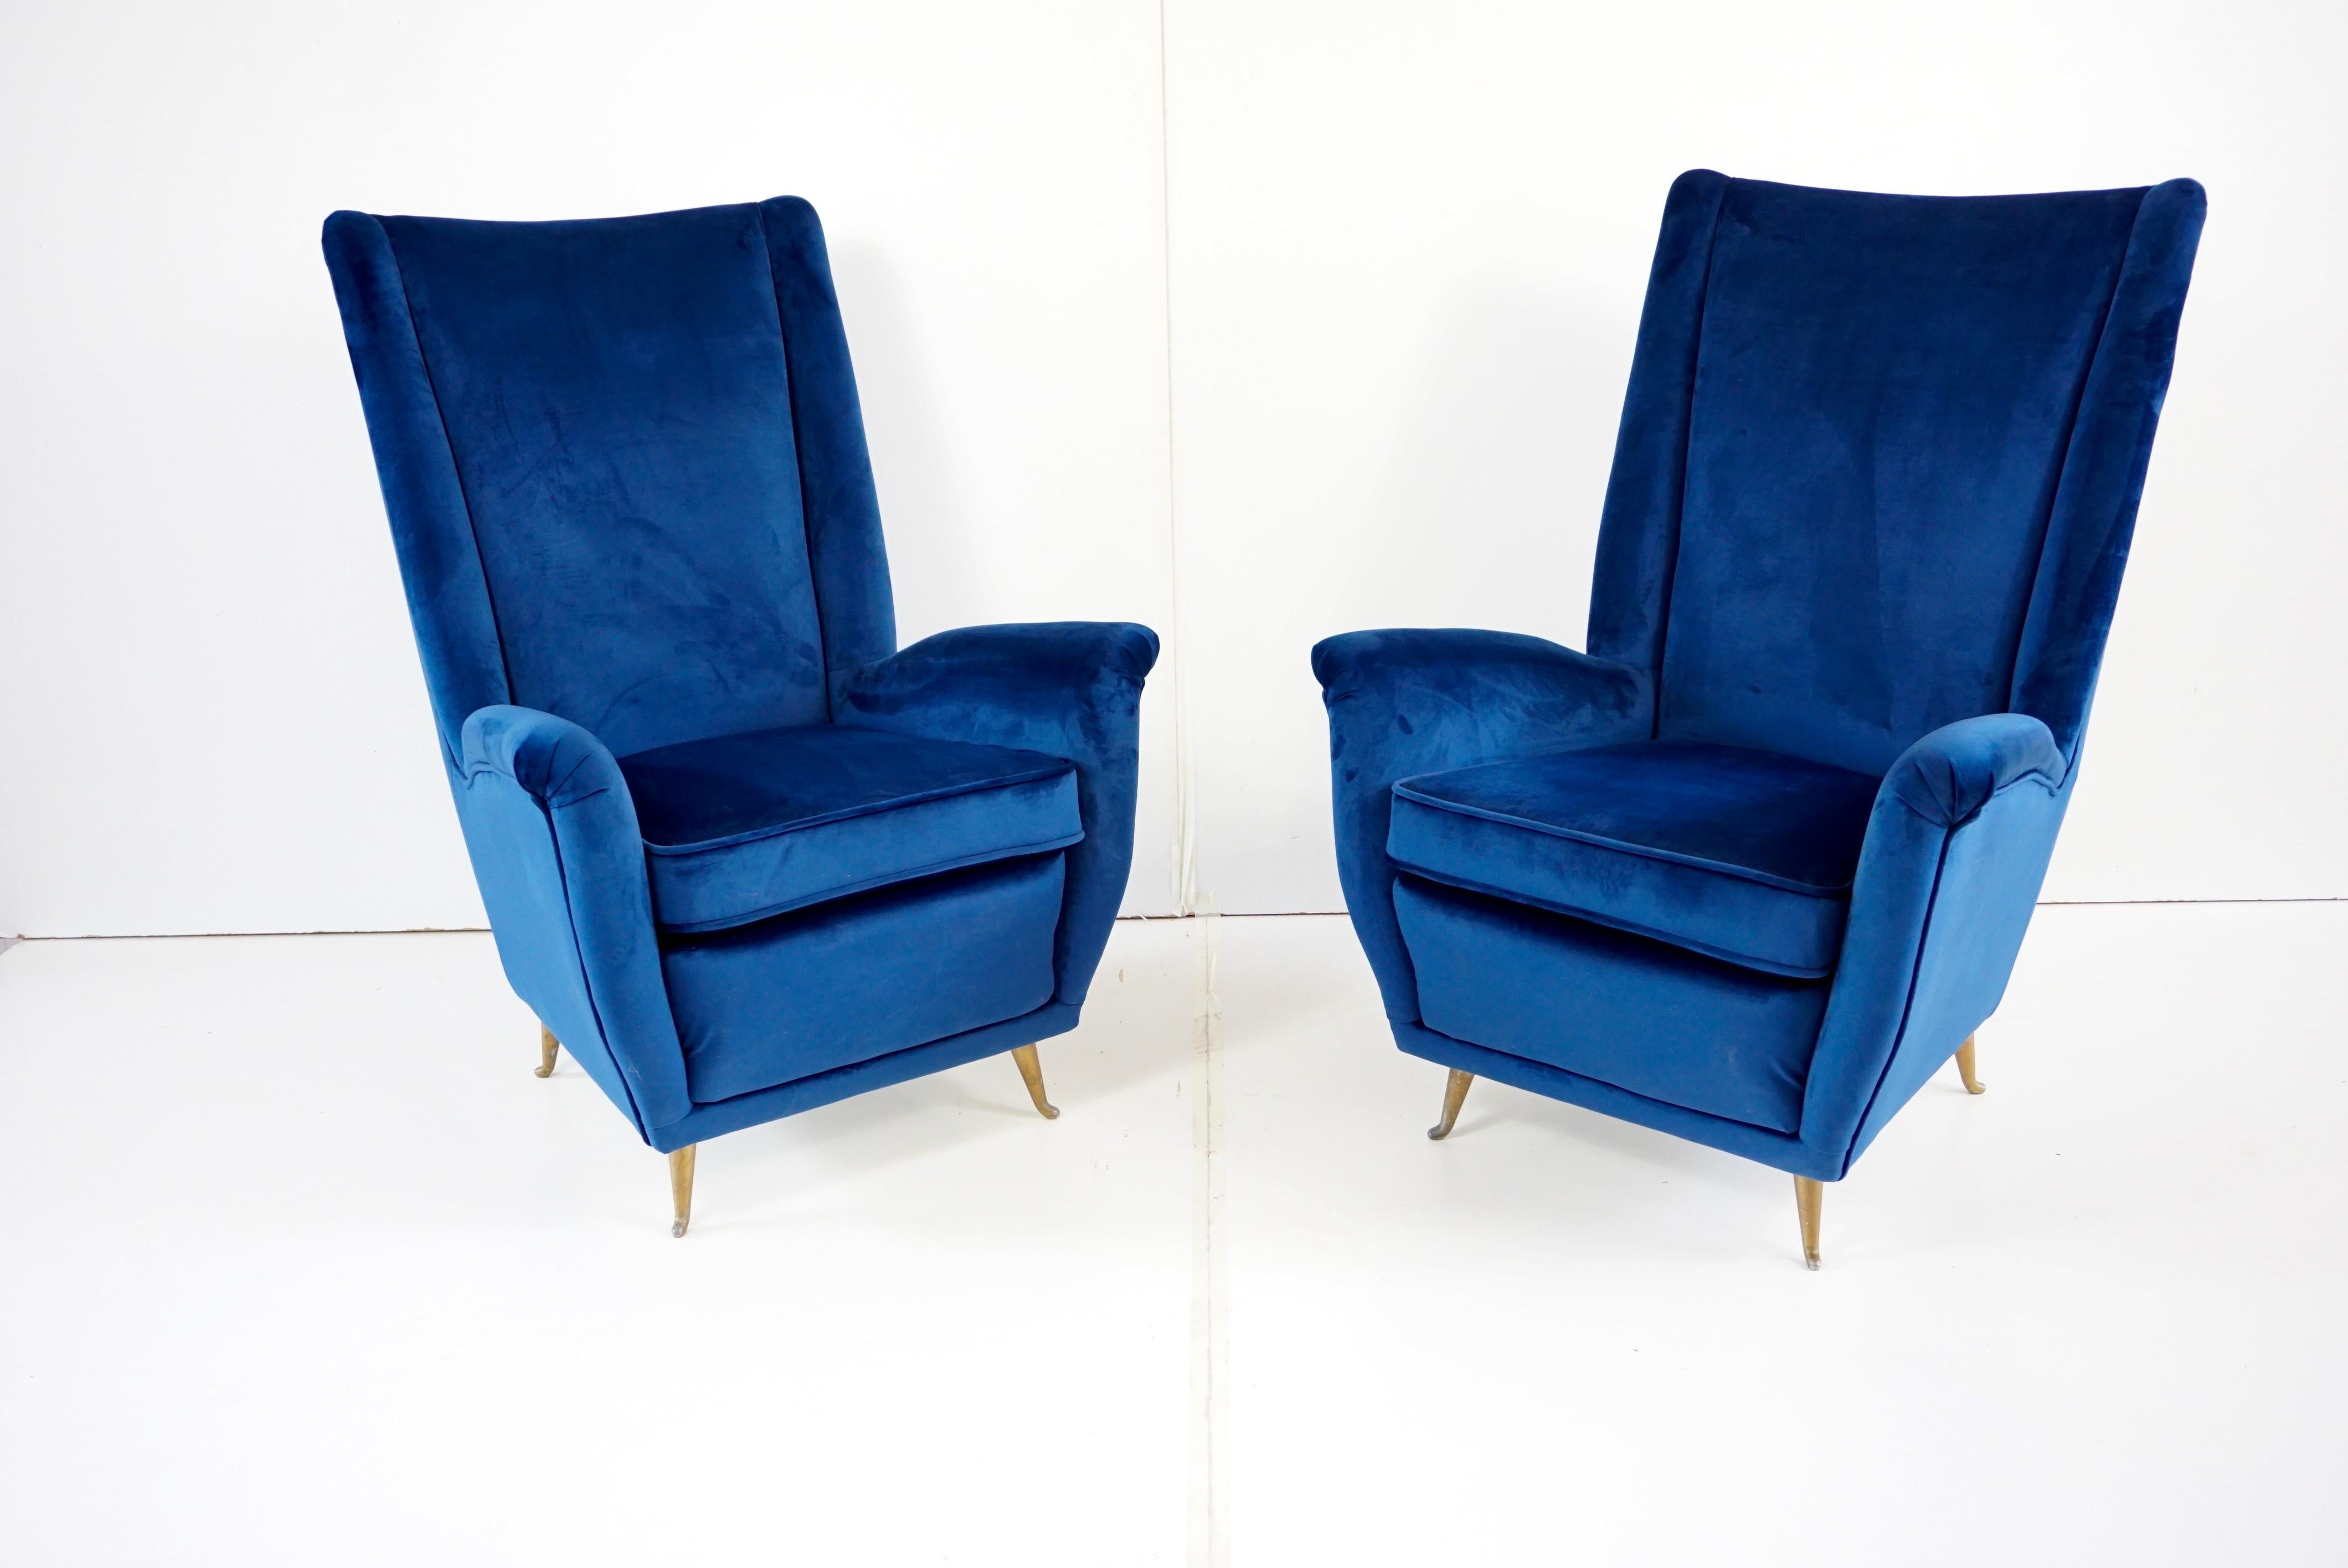 Pair of Blu Velvet Gio Ponti Bergere Wingback Armchairs by ISA, 1950 For Sale 2